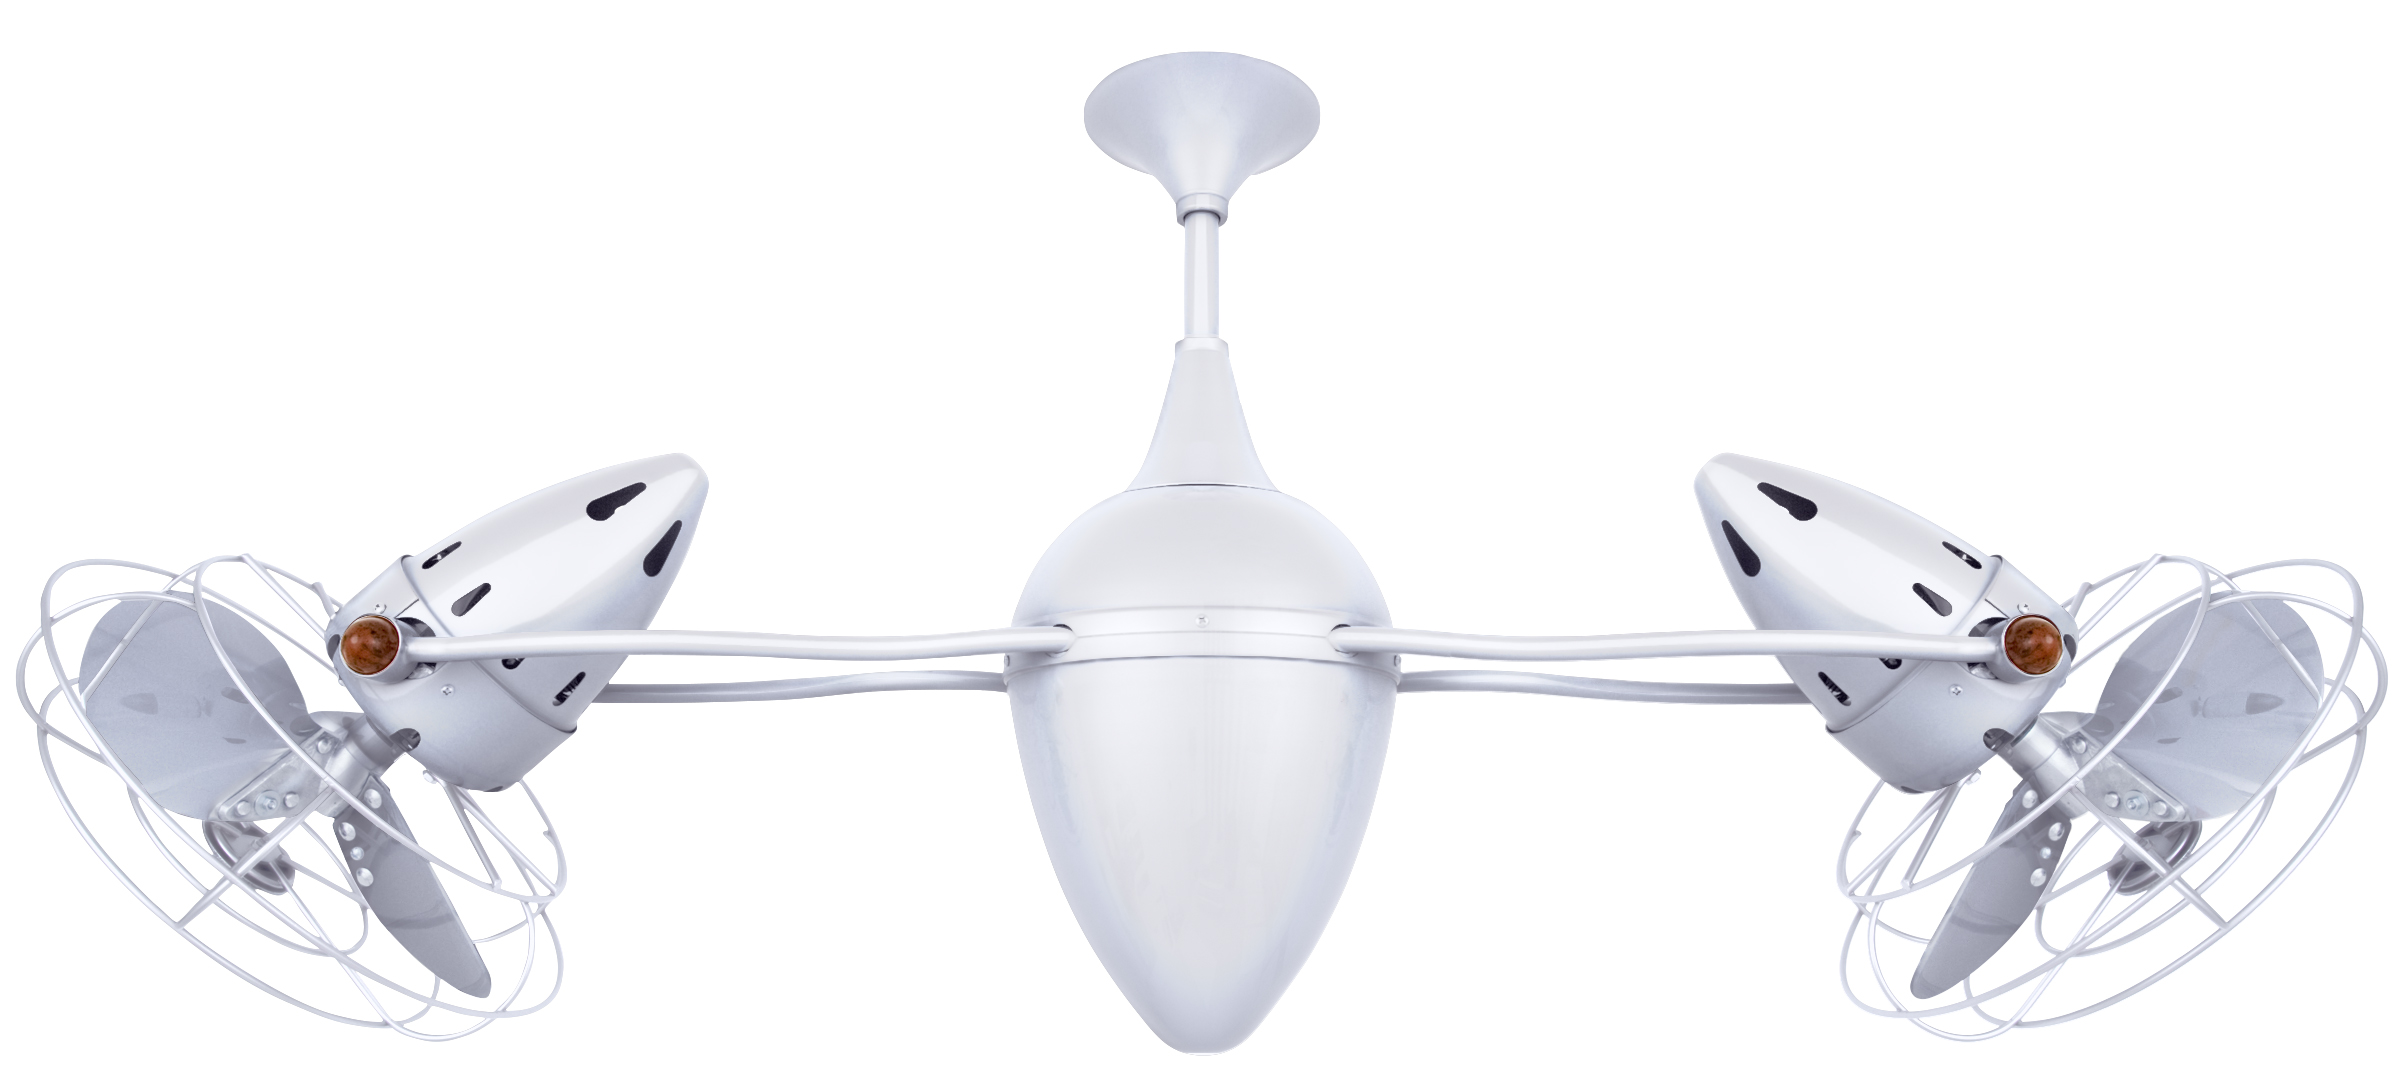 Ar Ruthiane dual headed rotational ceiling fan in gloss white with metal blades and decorative cage made by Matthews Fan Company.